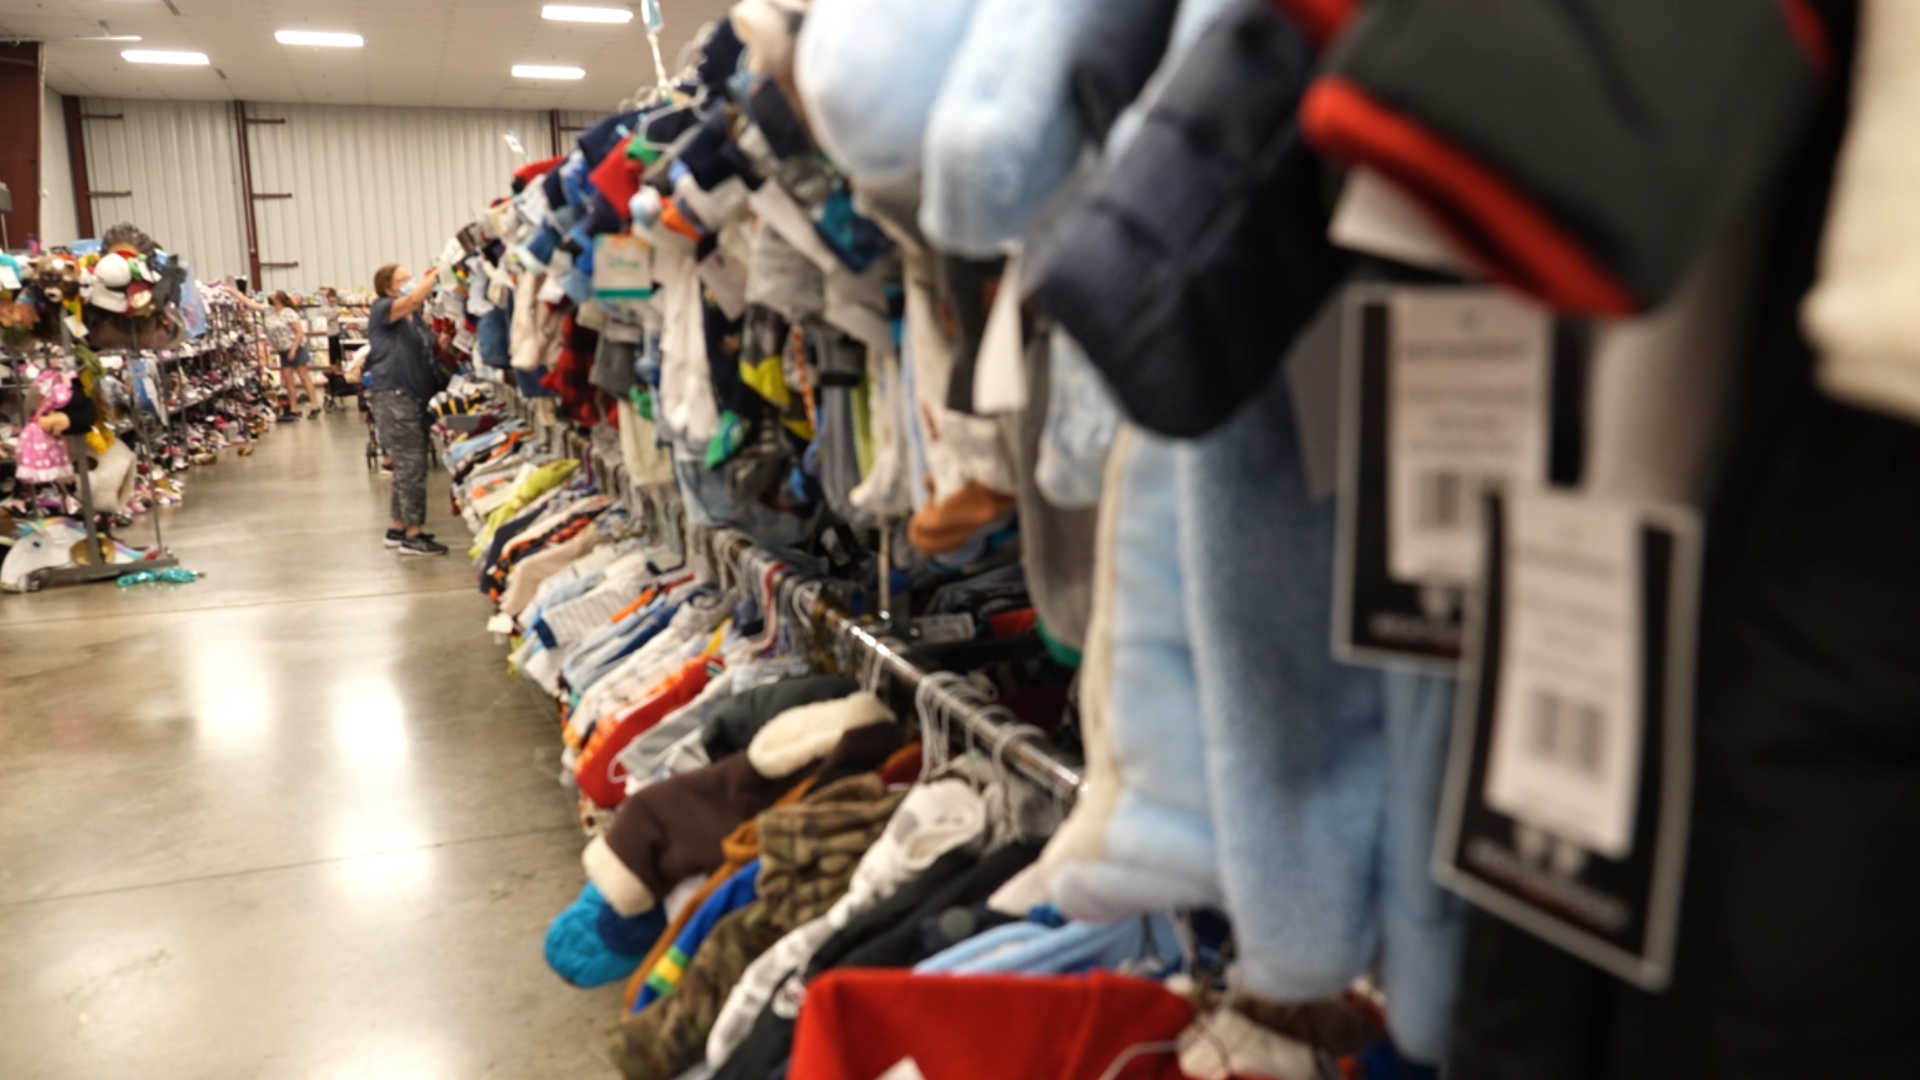 Families can find lightly used and new kid's clothing, toys, Halloween costumes, dance class costumes and baby gear at consignment shops or sales.